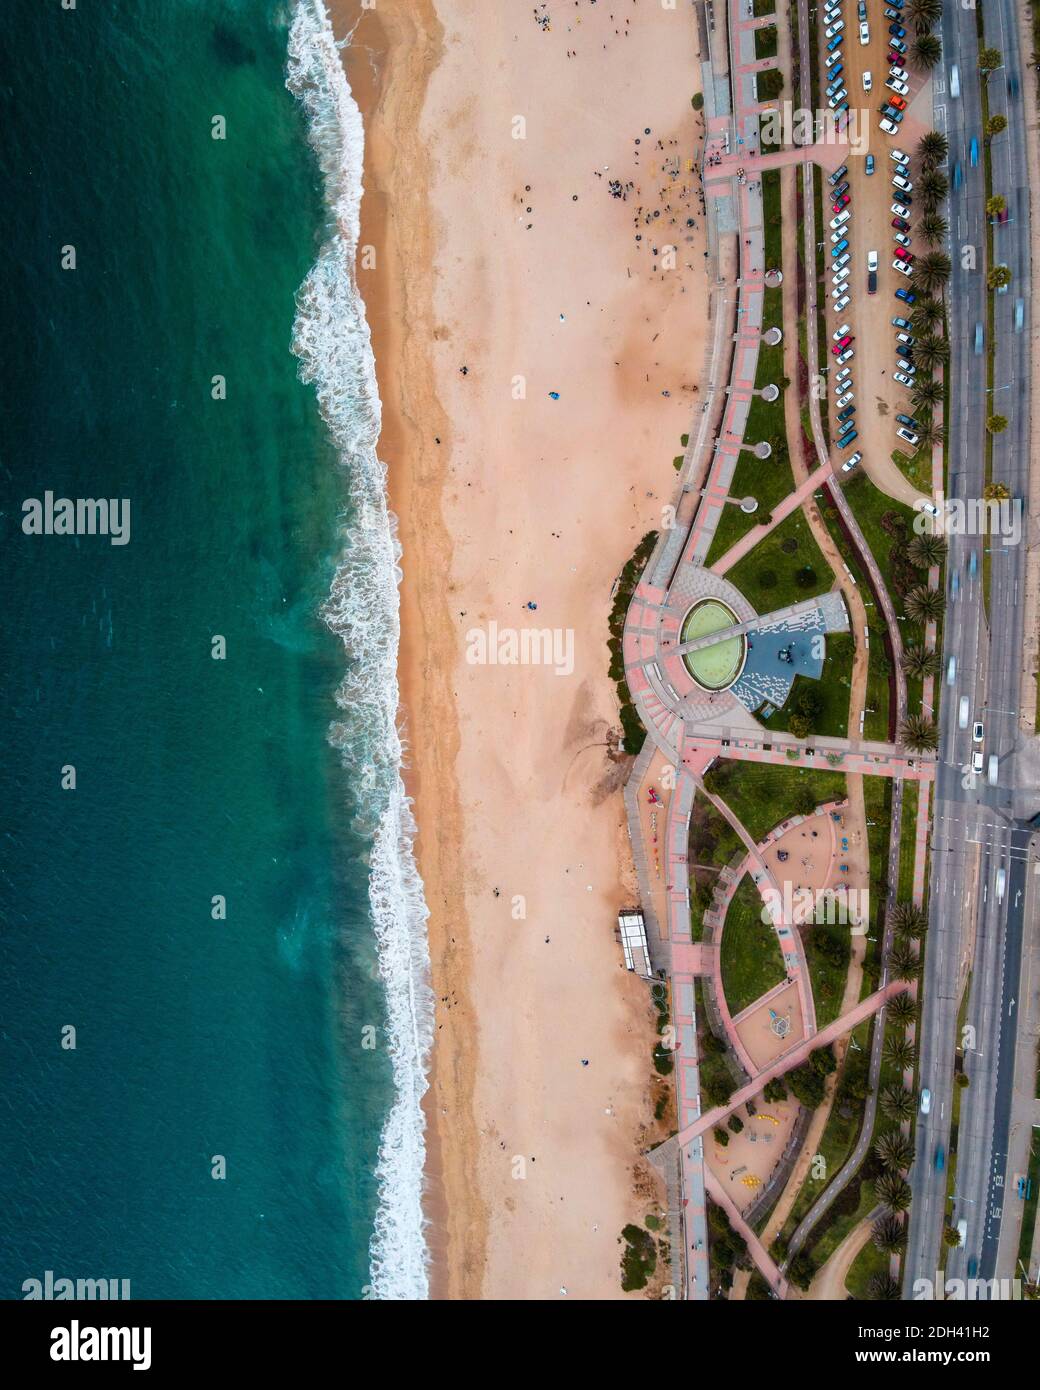 Zenith view of the Del Deporte Beach located in the city of Vina del Mar, Chile with waves of the sea and people playing on the sand Stock Photo